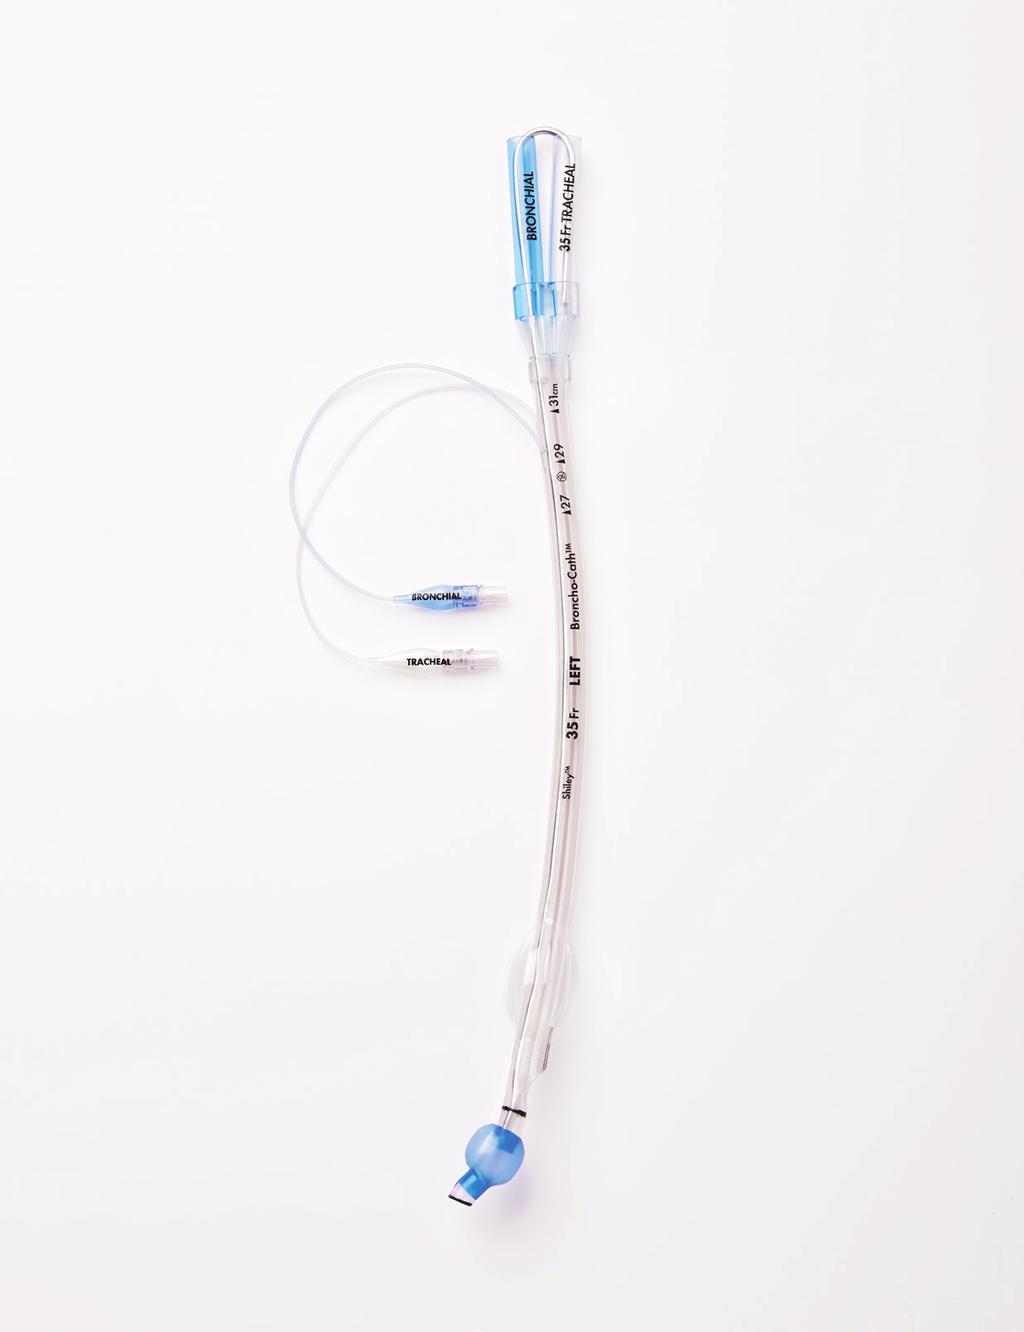 ENDOBRONCHIAL SOLUTIONS Shiley endobronchial tube These tubes come in two options one for each lung to support oxygenation during single-lung ventilation.